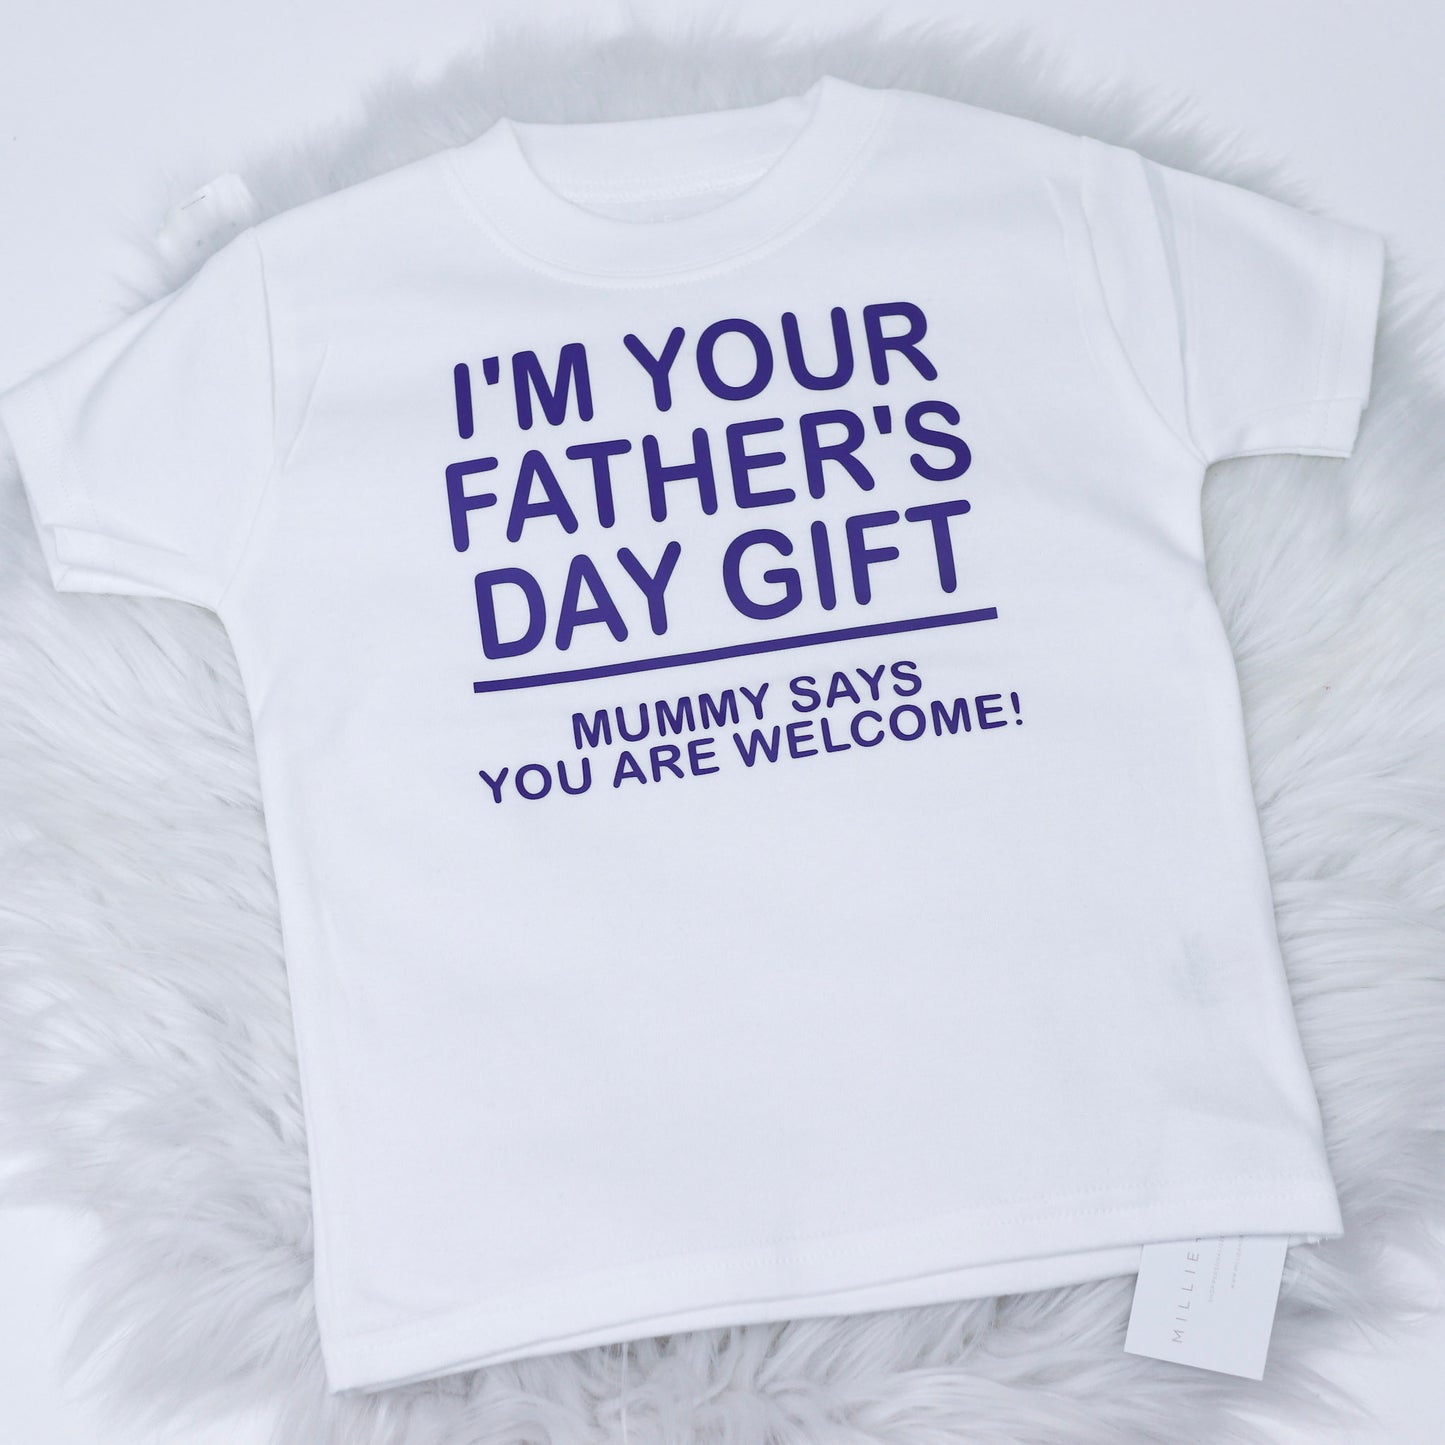 I'm Your Father's Day Gift T-Shirt